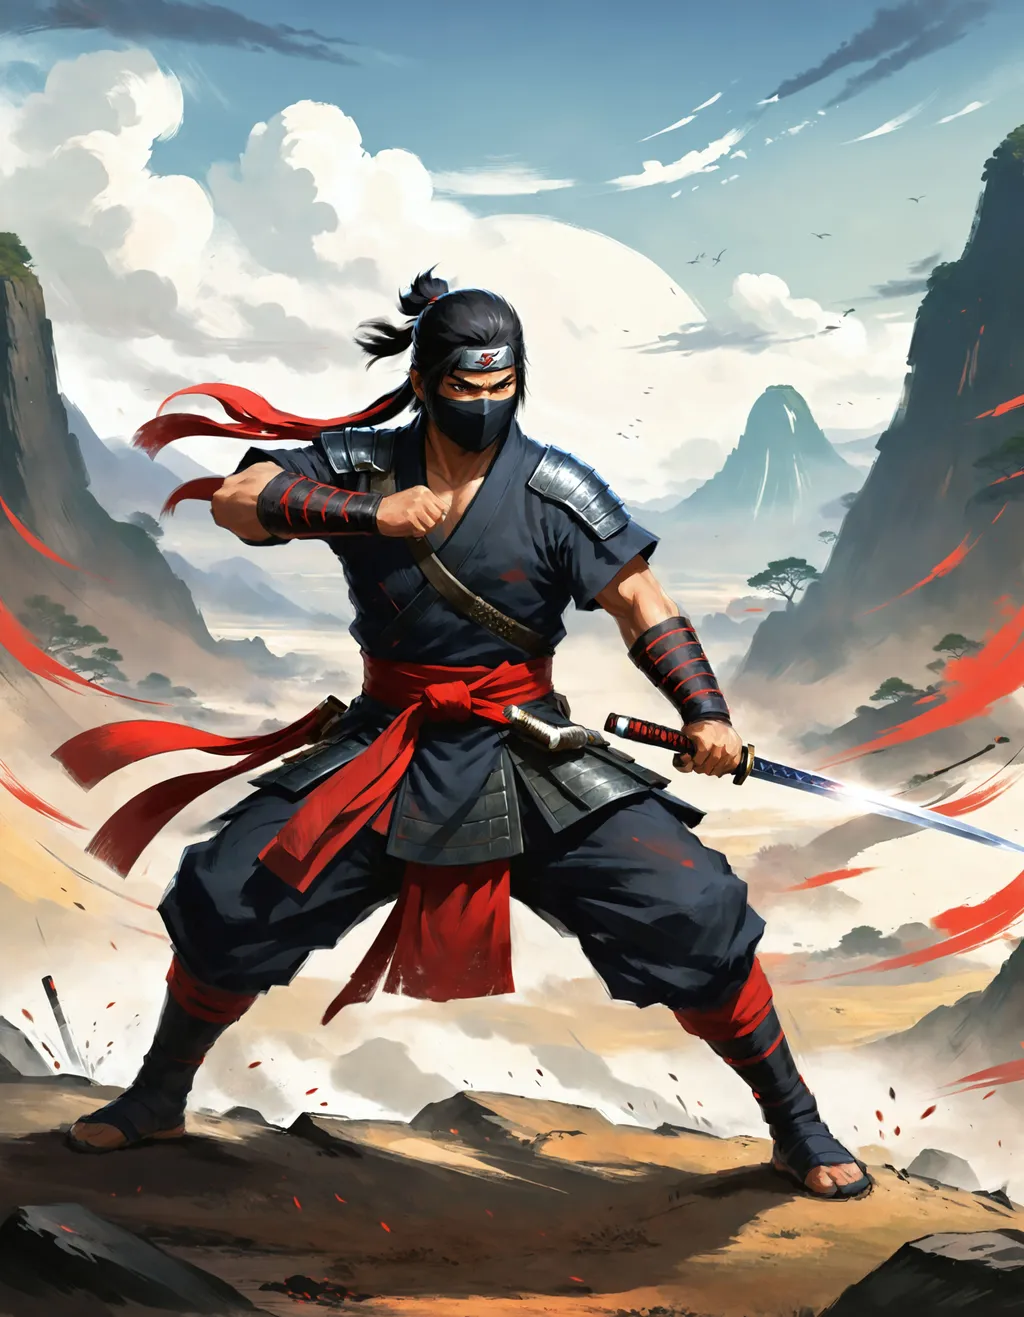 Prompt: dramatic action pose, dynamic ninja stance, Katana sword in hand ready for battle, Anime character concept art, on a baron wasteland, wearing gi and red sash.